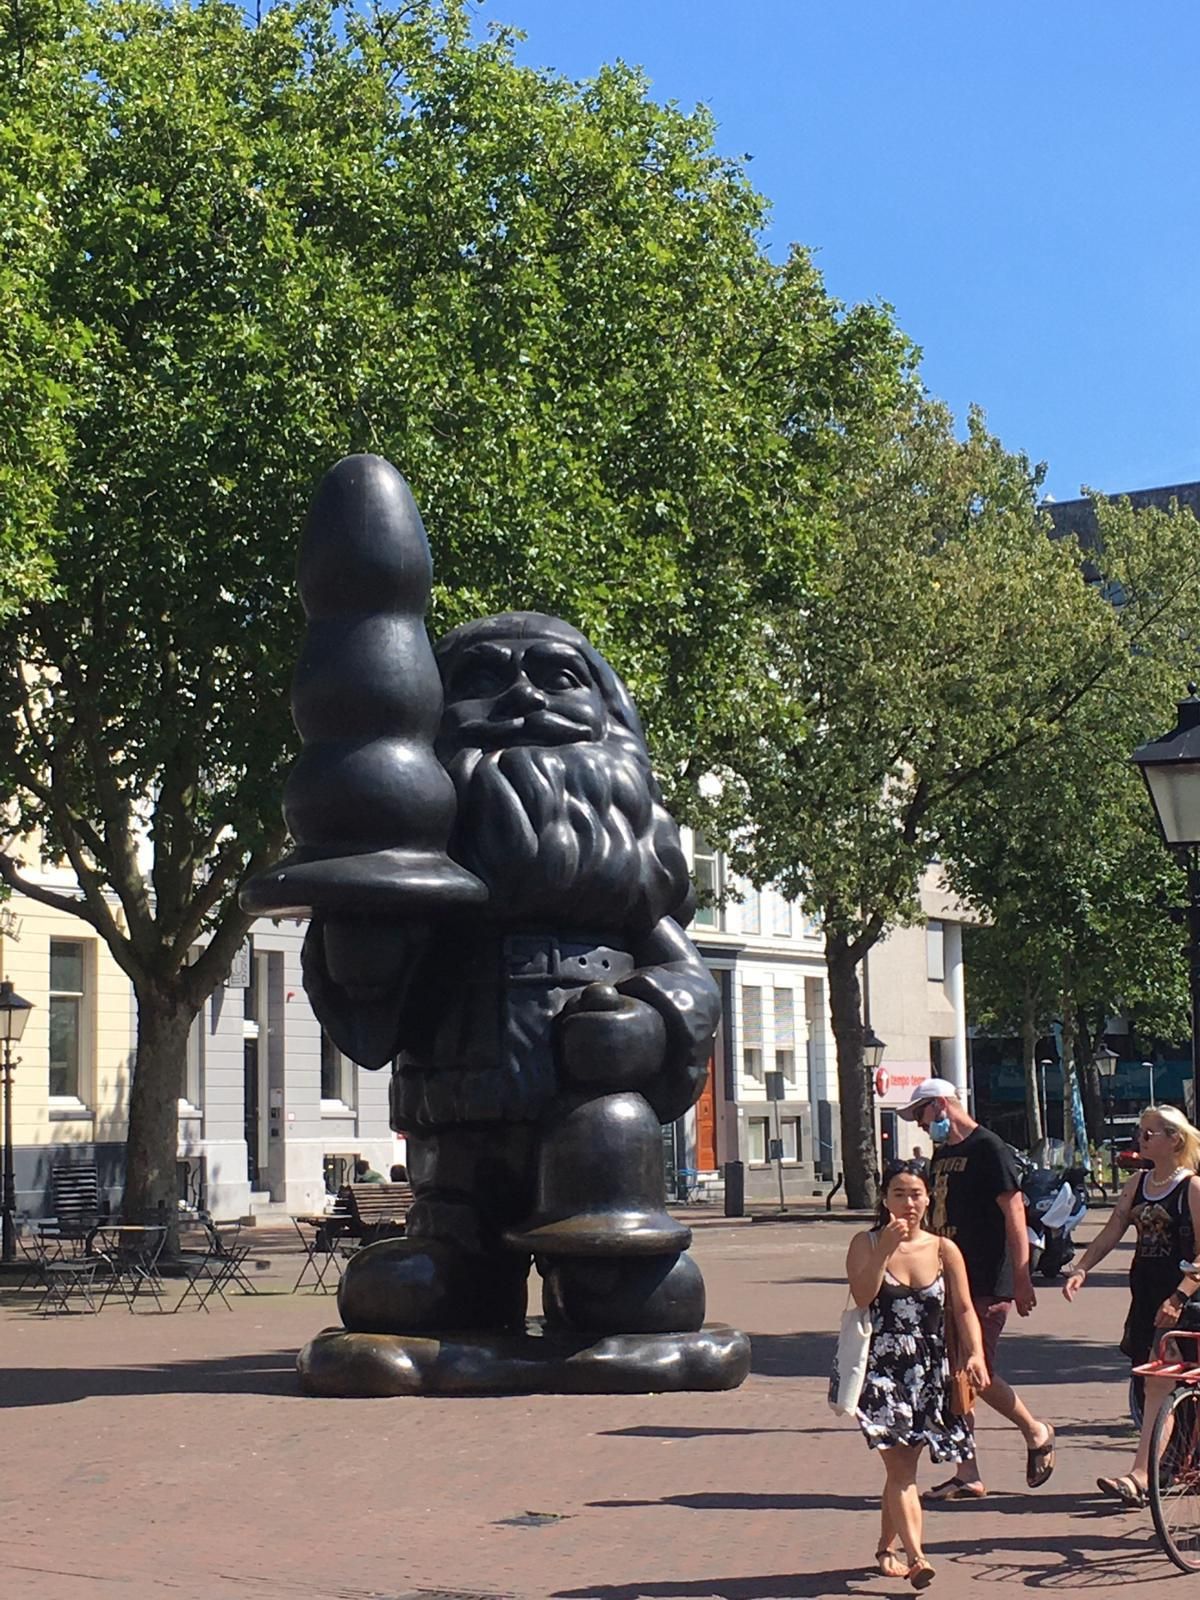 Saw this gnome in Rotterdam in the Netherlands. According to Wikipedia people also like to call it the “buttplug gnome”